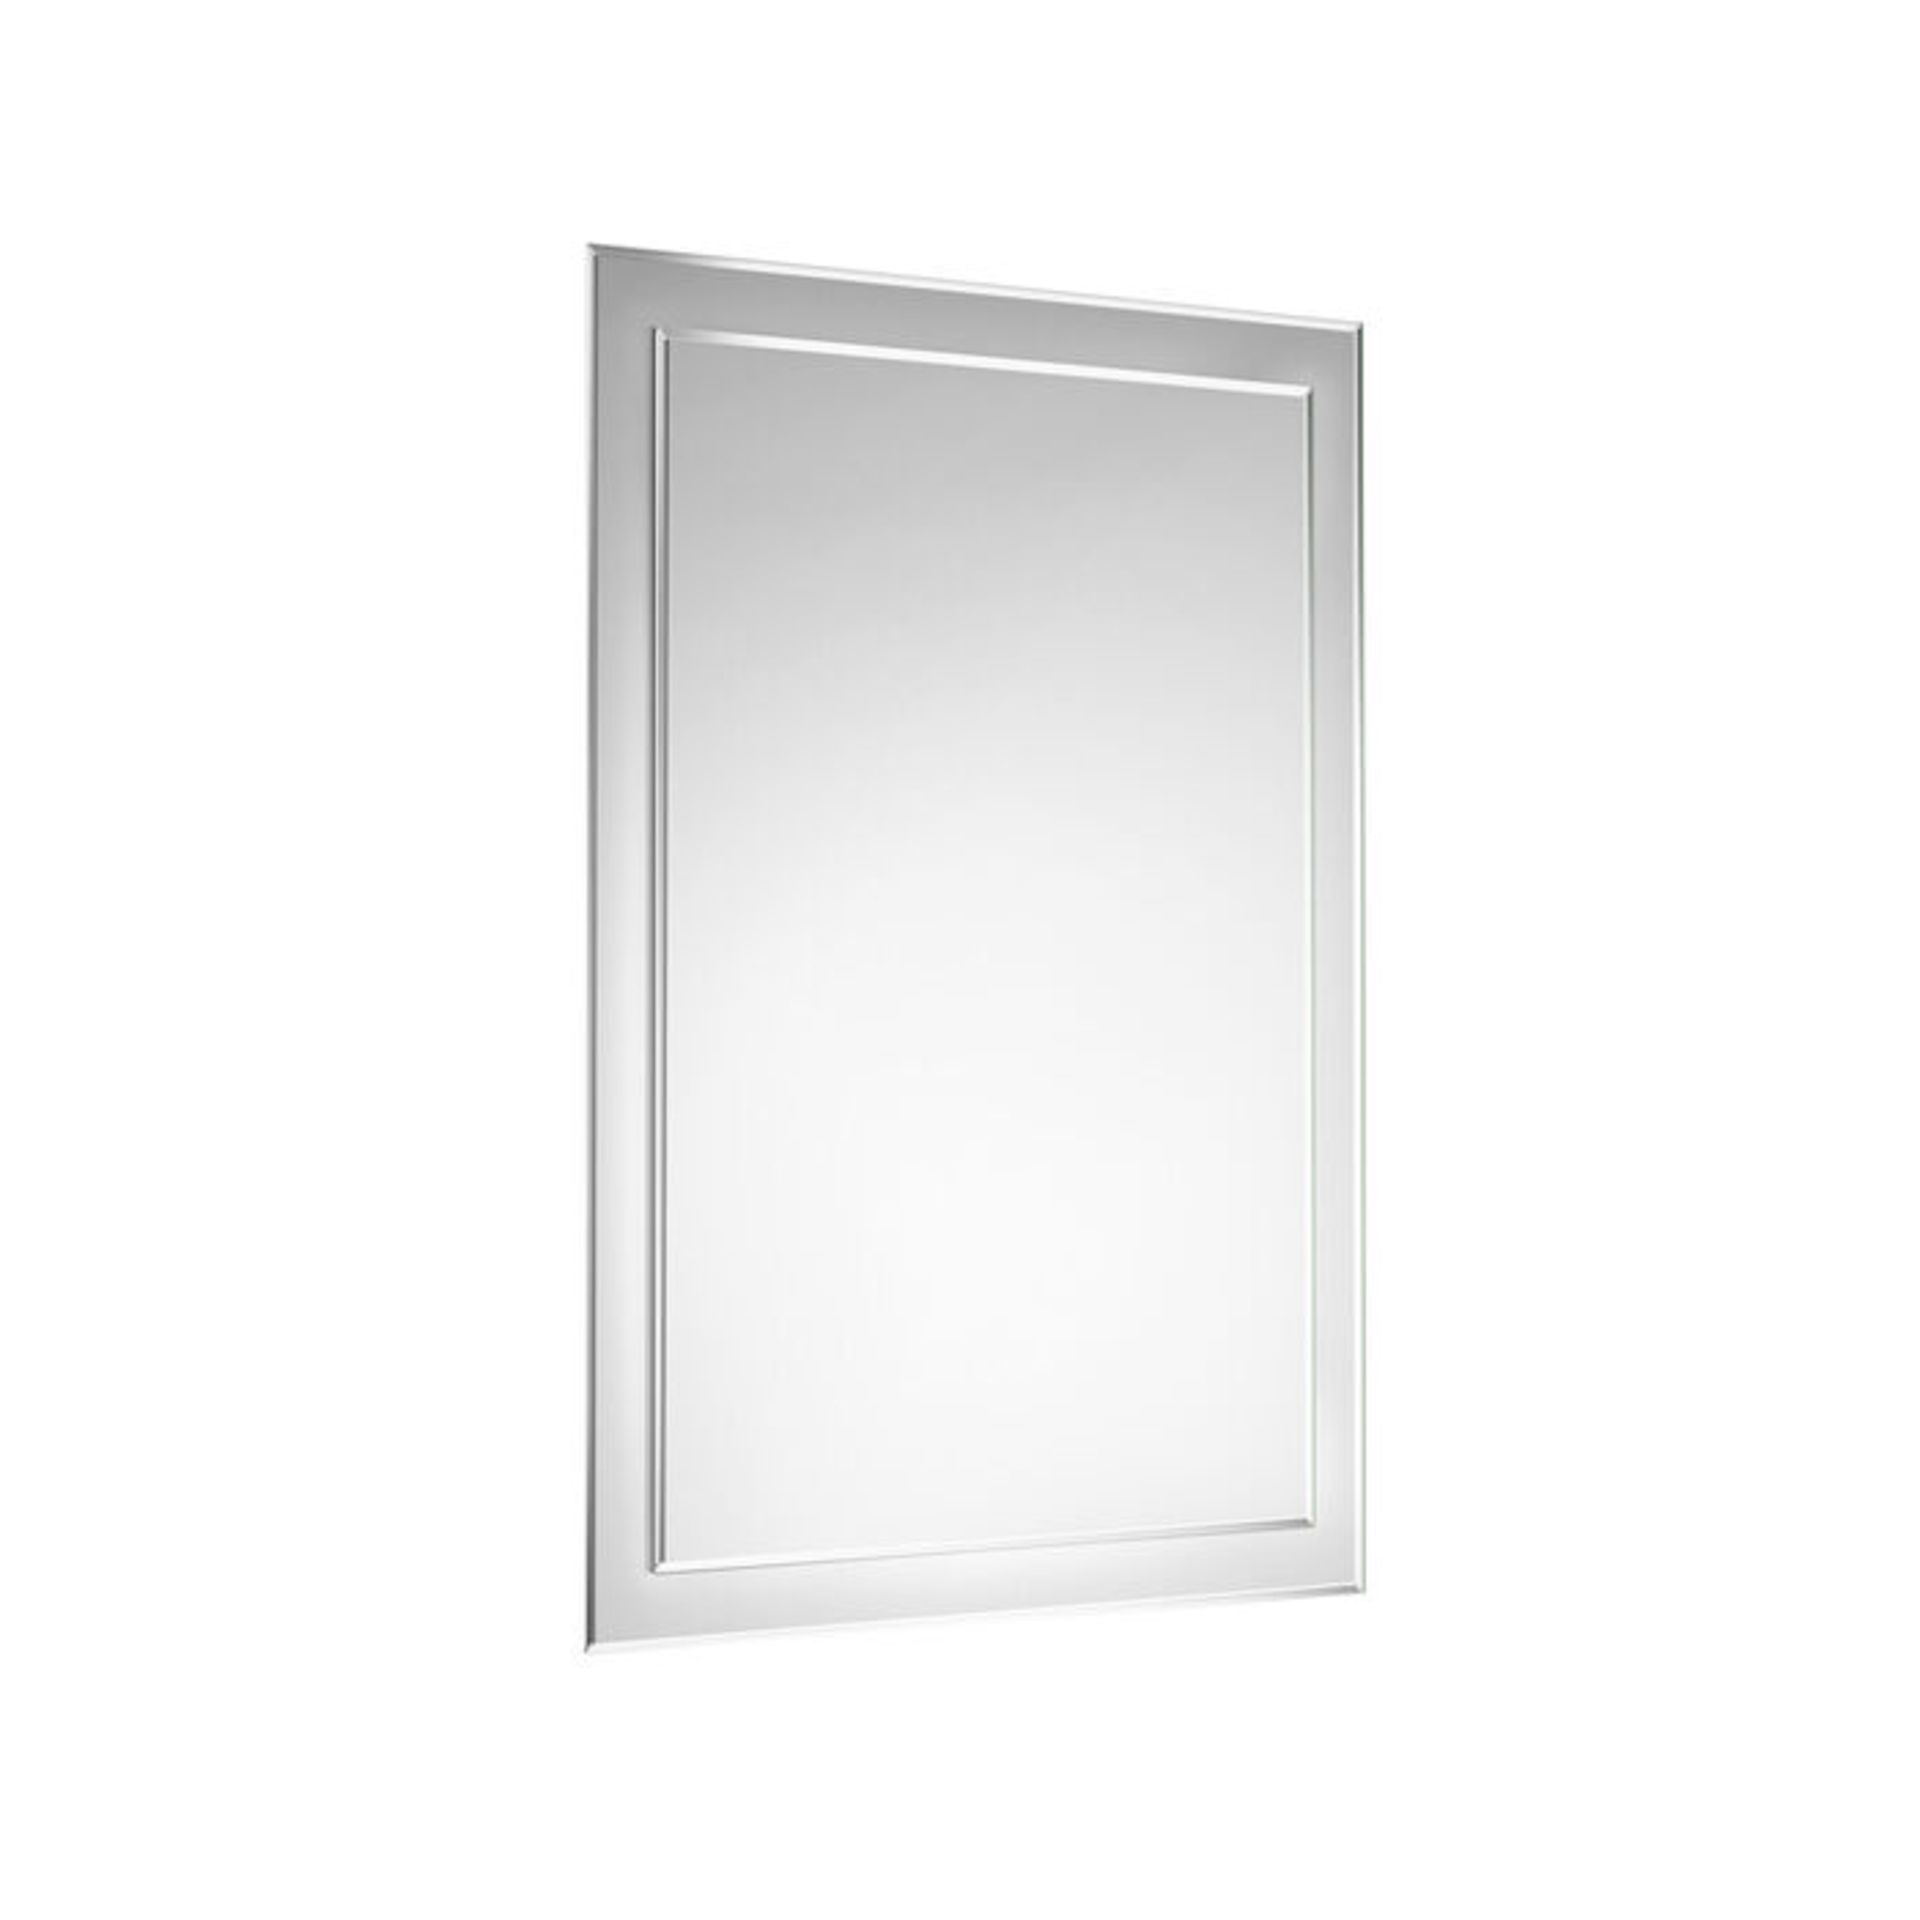 500x700mm Bevel Mirror . Comes fully assembled for added convenience Versatile with a choice of... - Bild 2 aus 2